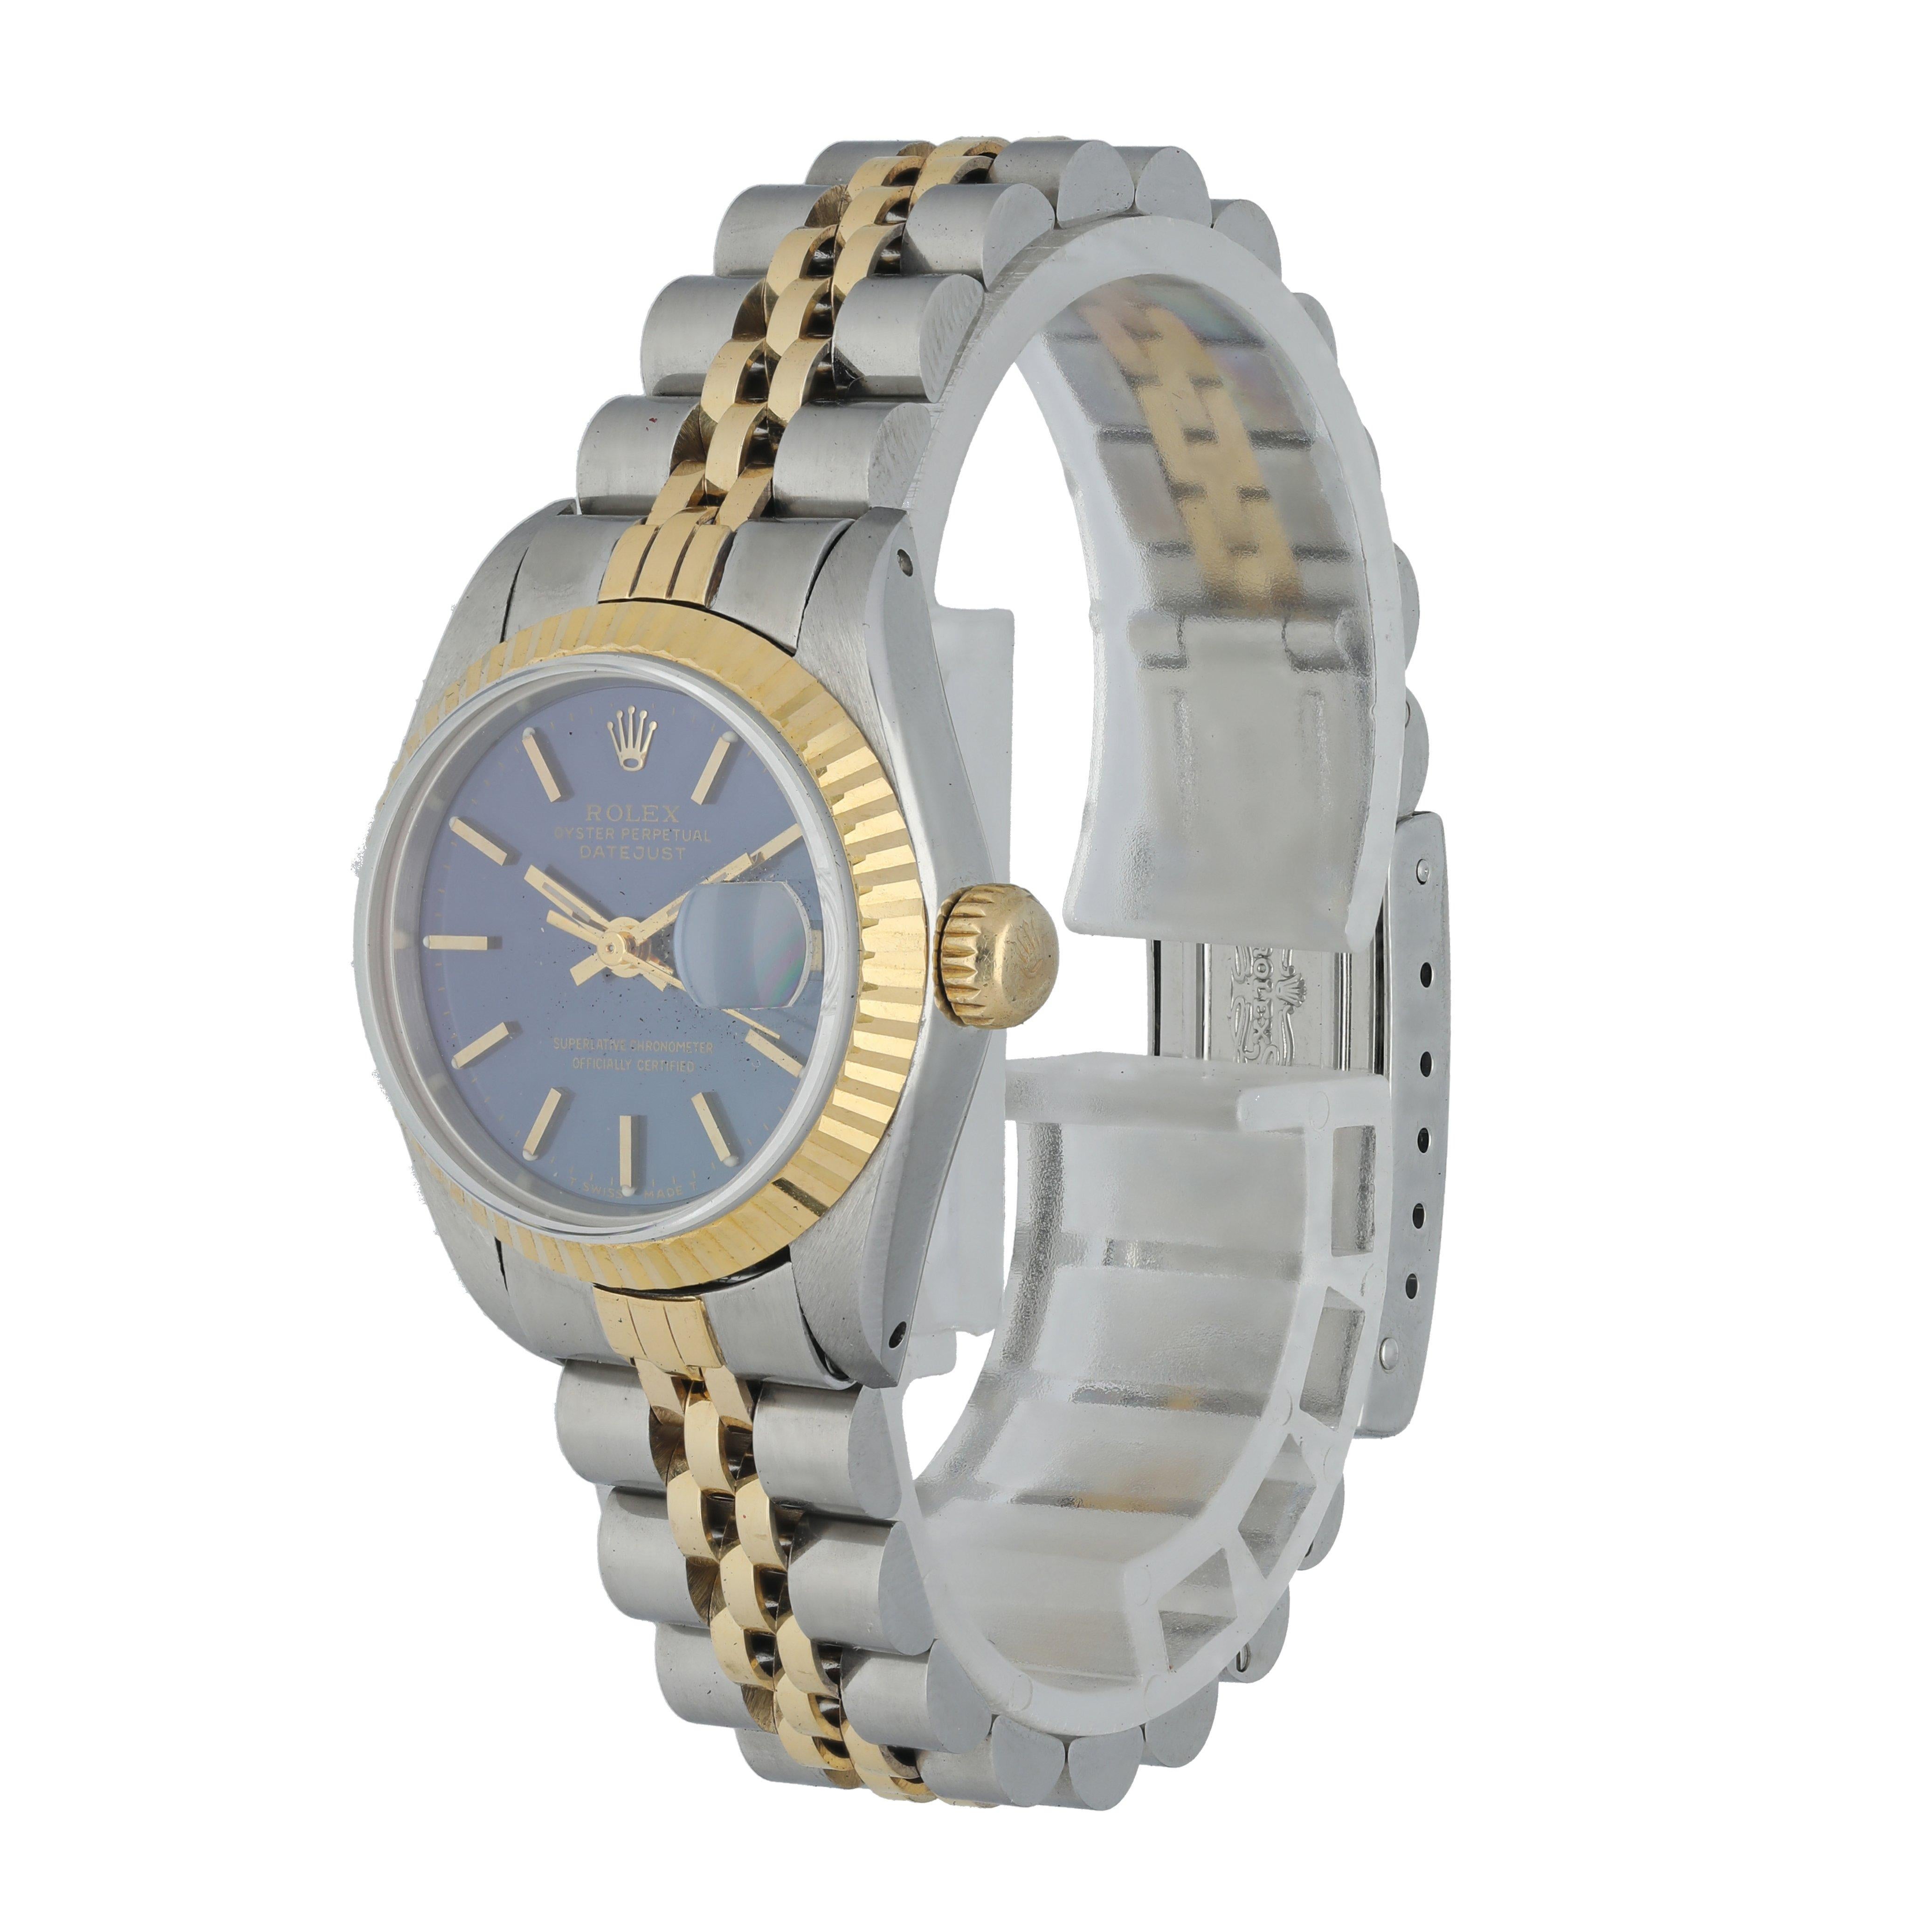 Rolex Datejust 69173 Ladies Watch.
26mm Stainless Steel case. 
Yellow Gold fluted bezel. 
Blue dial with luminous gold hands and index hour markers. 
Minute markers on the outer dial. 
Date display at the 3 o'clock position. 
Two-tone stainless